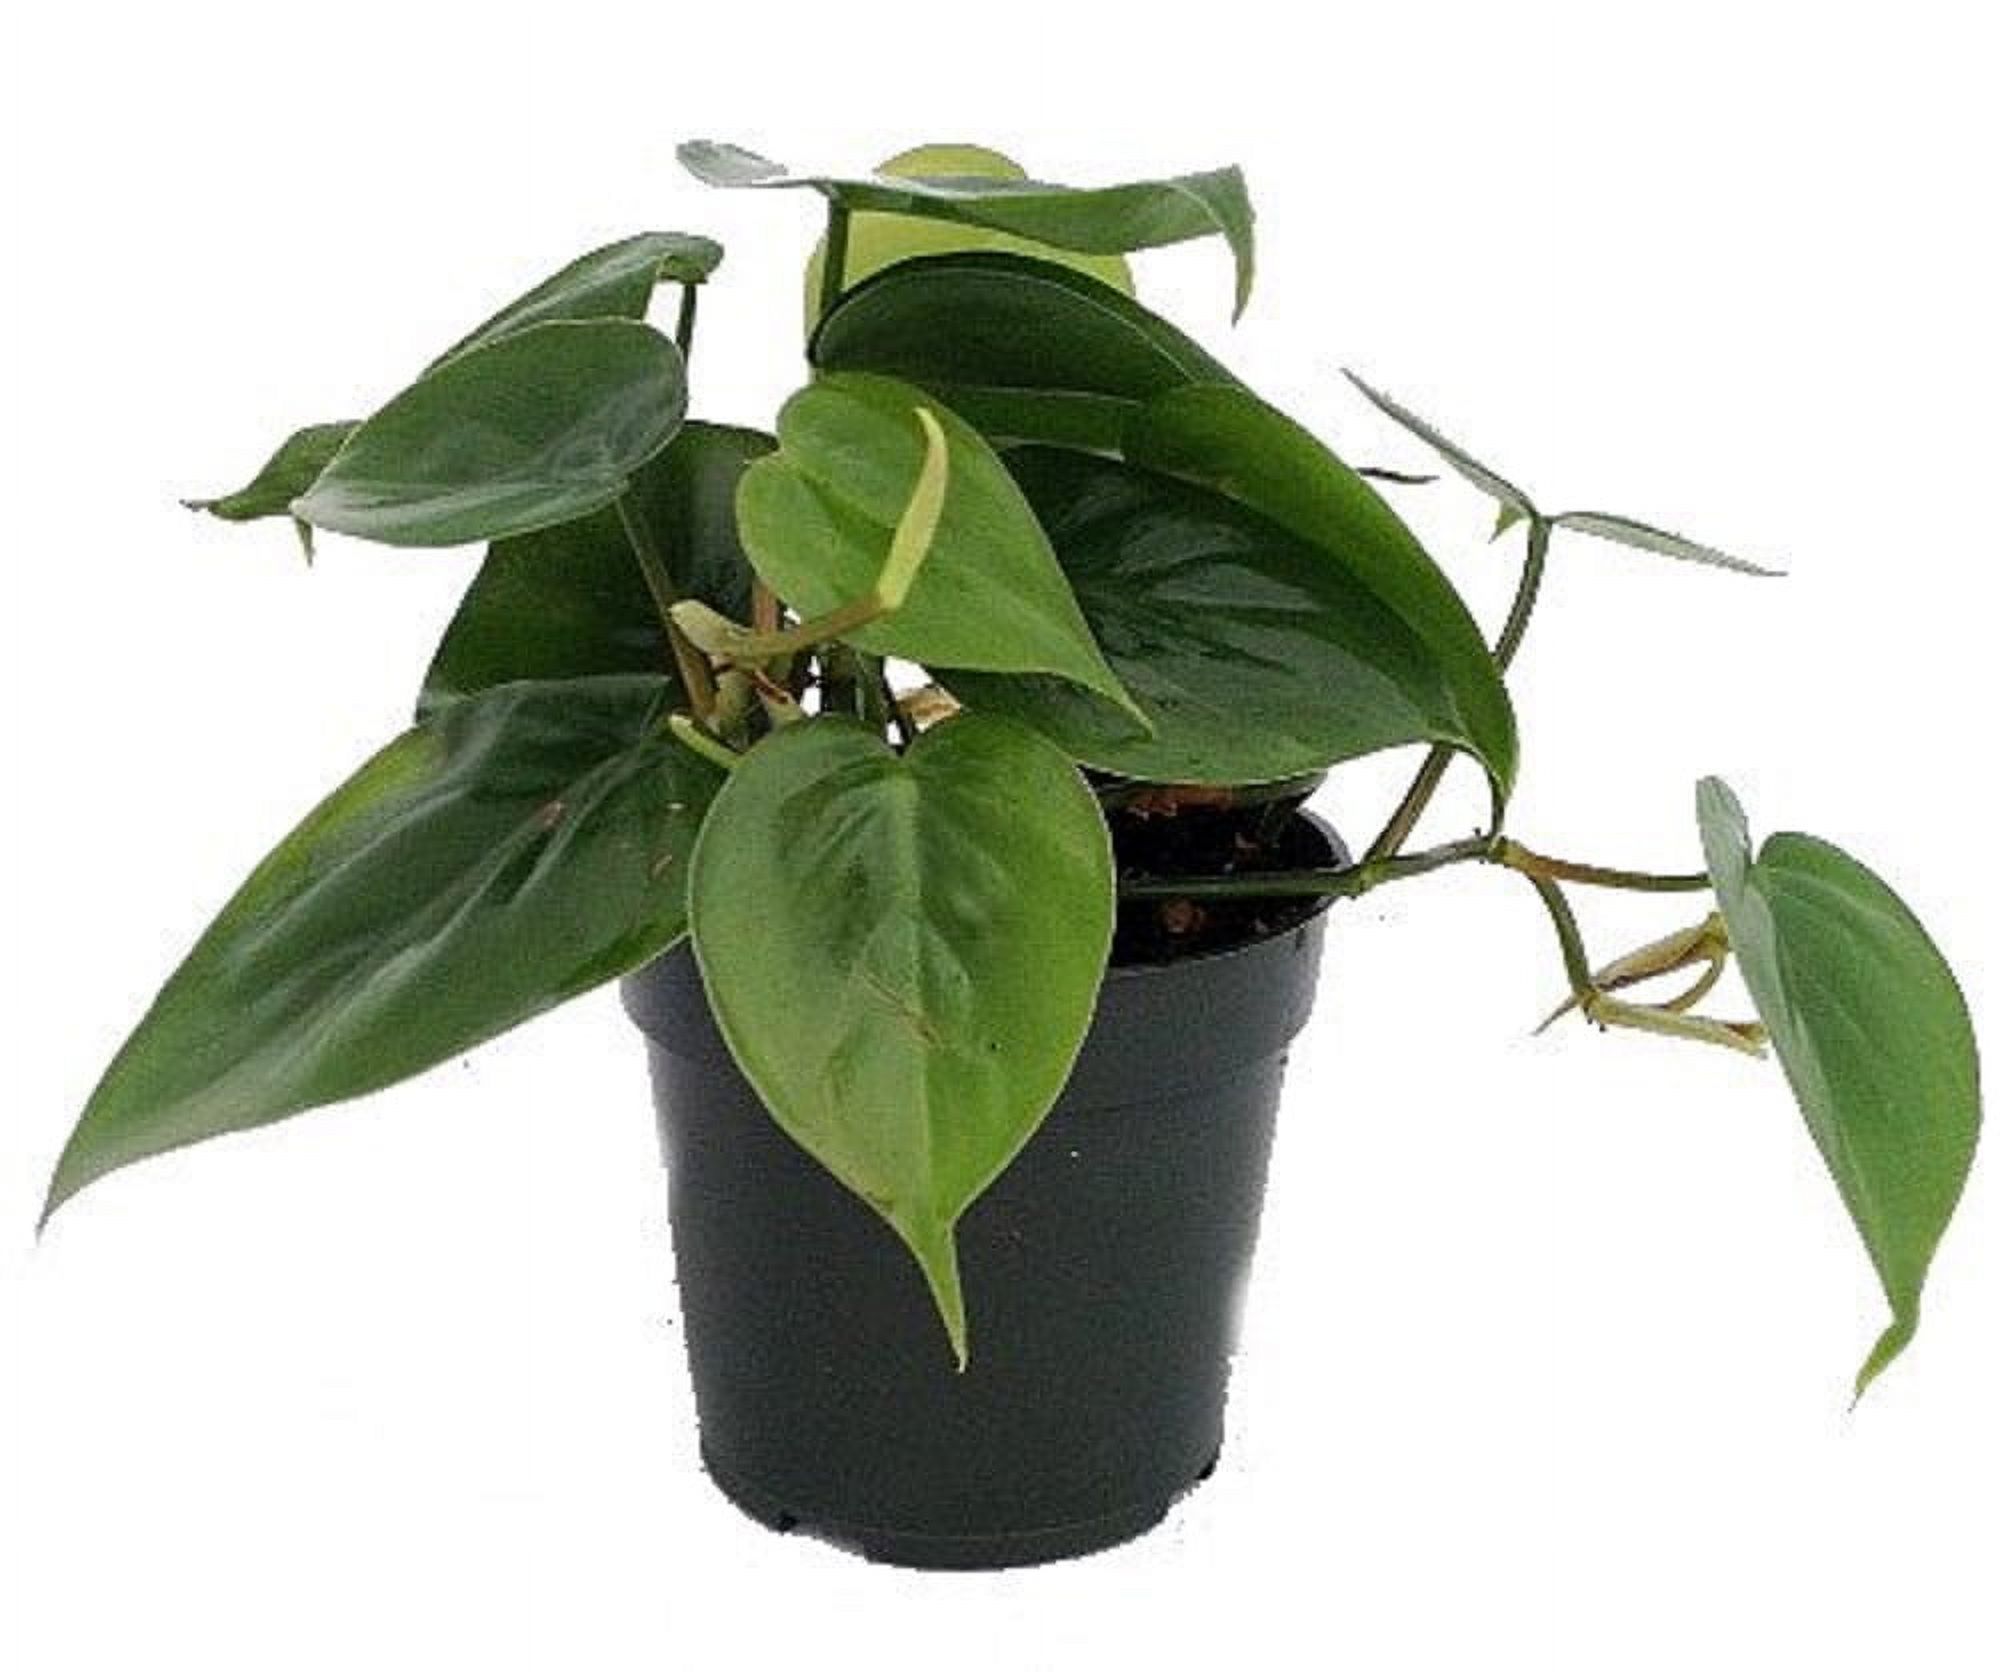 Hirt's Gardens Heart Leaf Philodendron - Easiest House Plant to Grow - 4" Pot - image 1 of 4